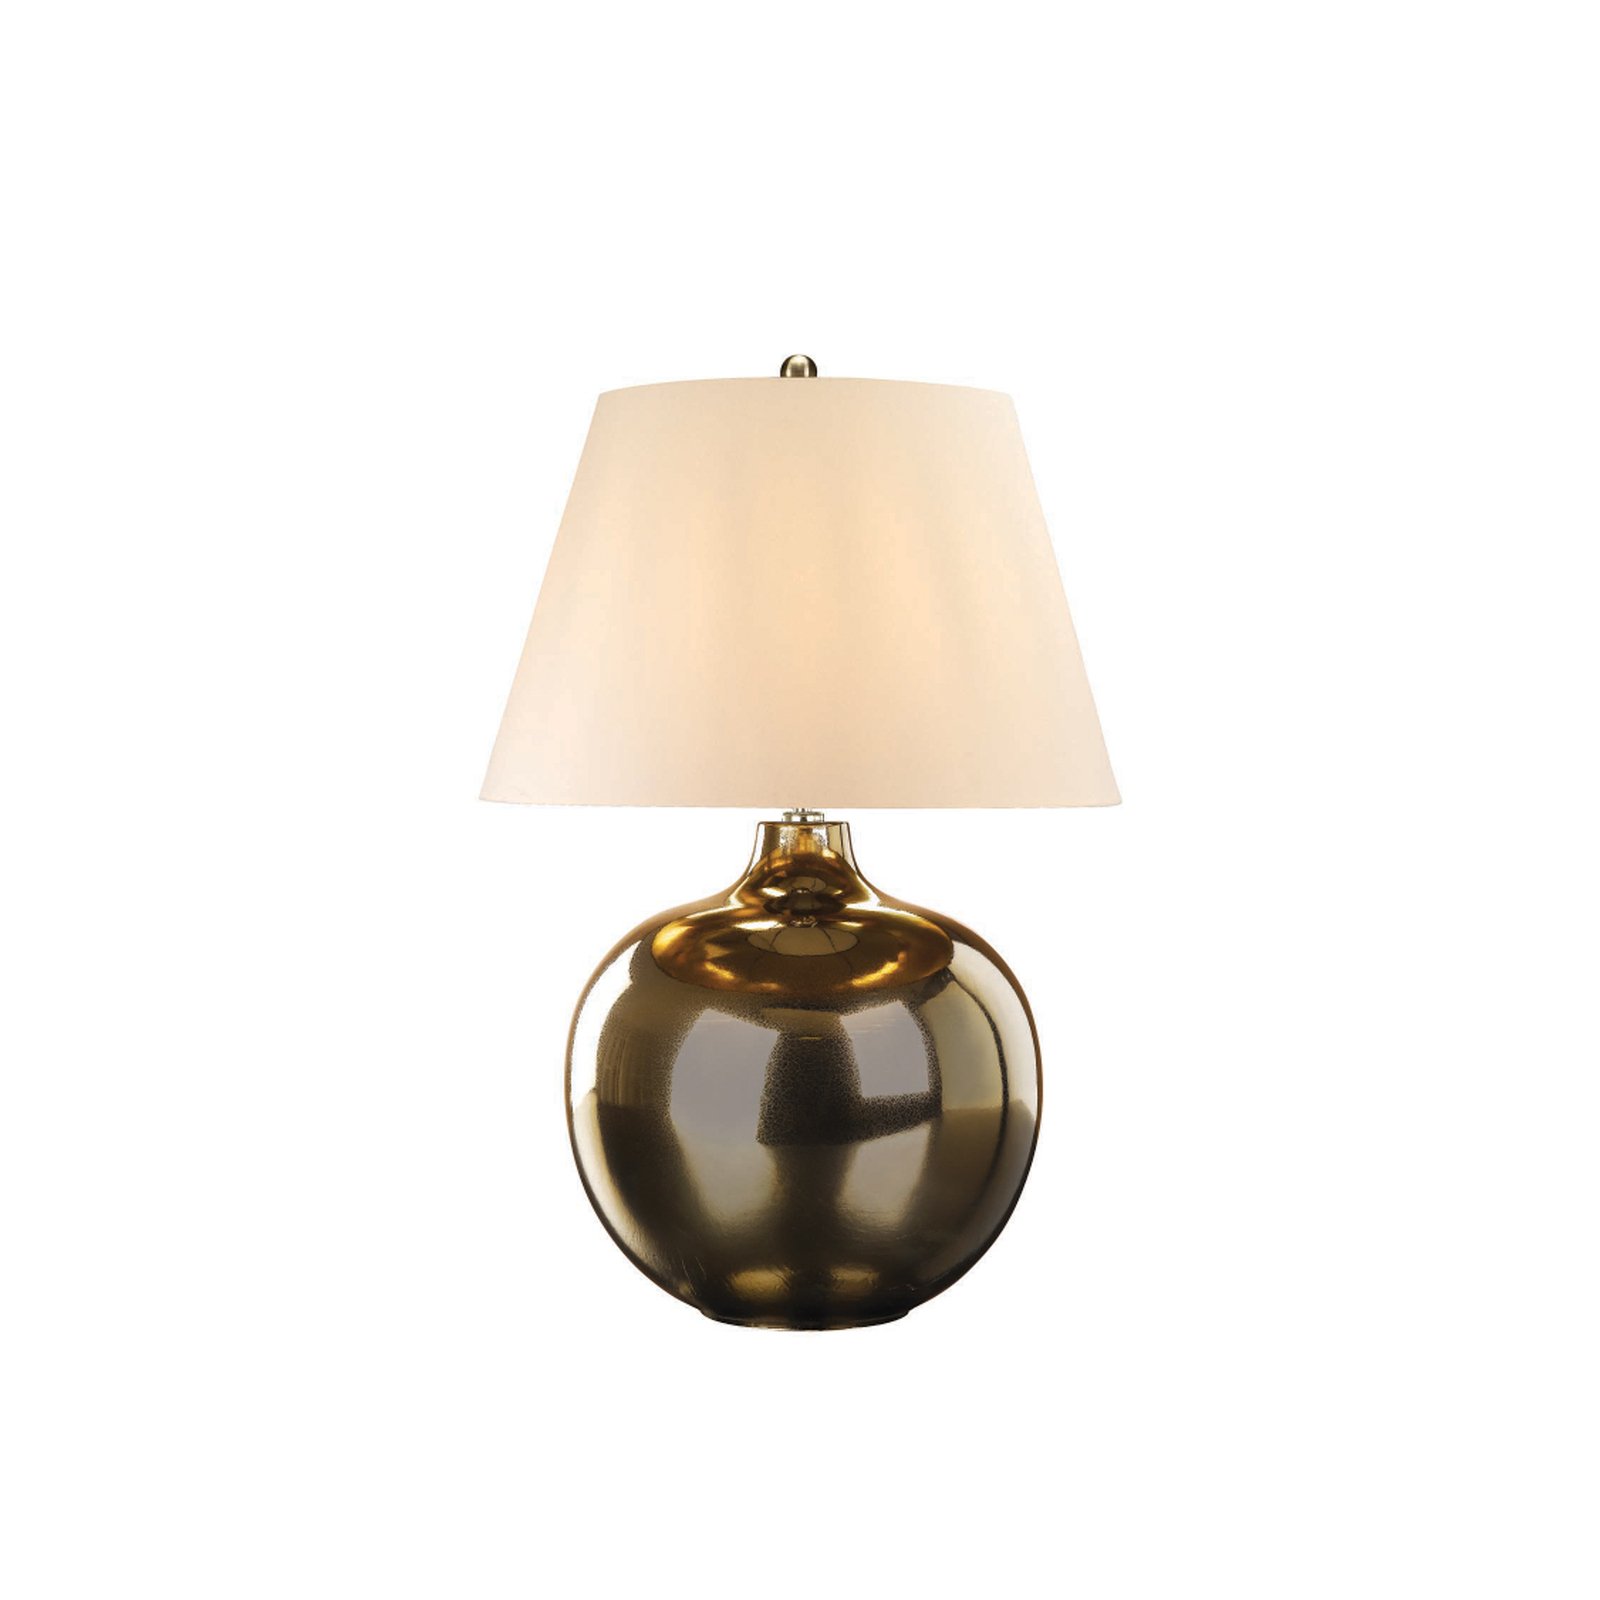 Ottoman table lamp with ceramic base, ivory lampshade